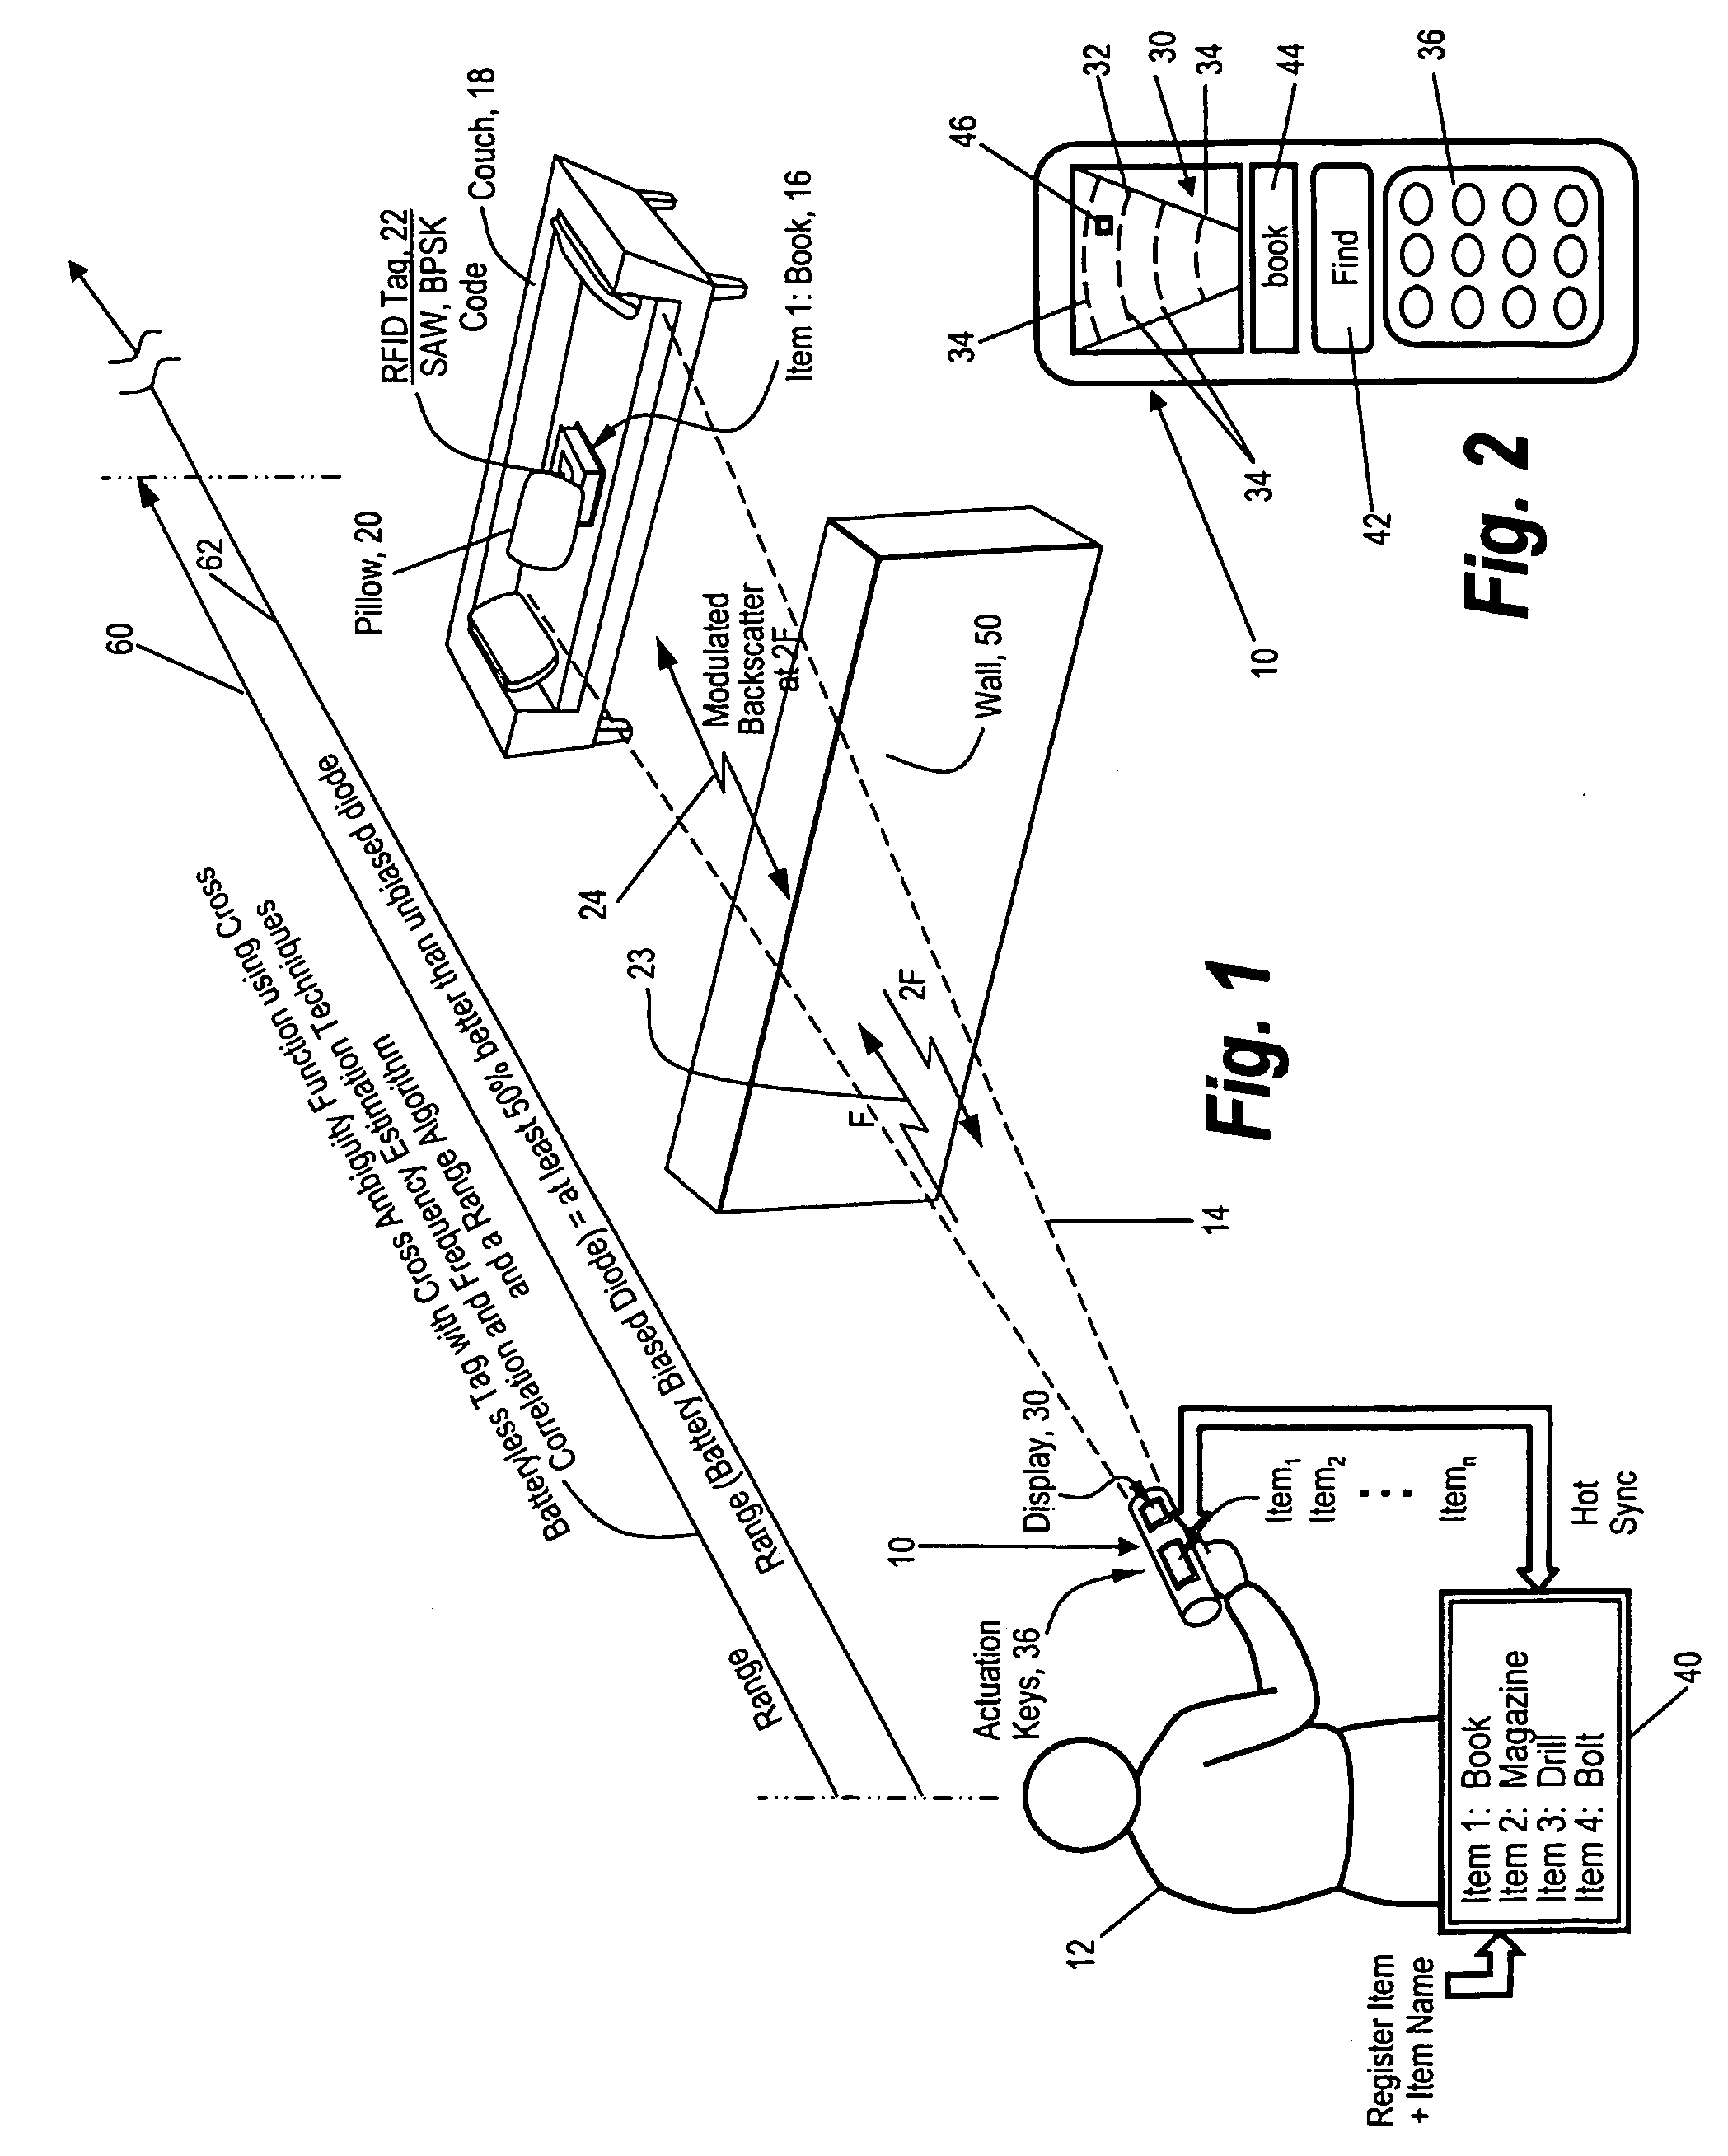 Method and apparatus for locating items